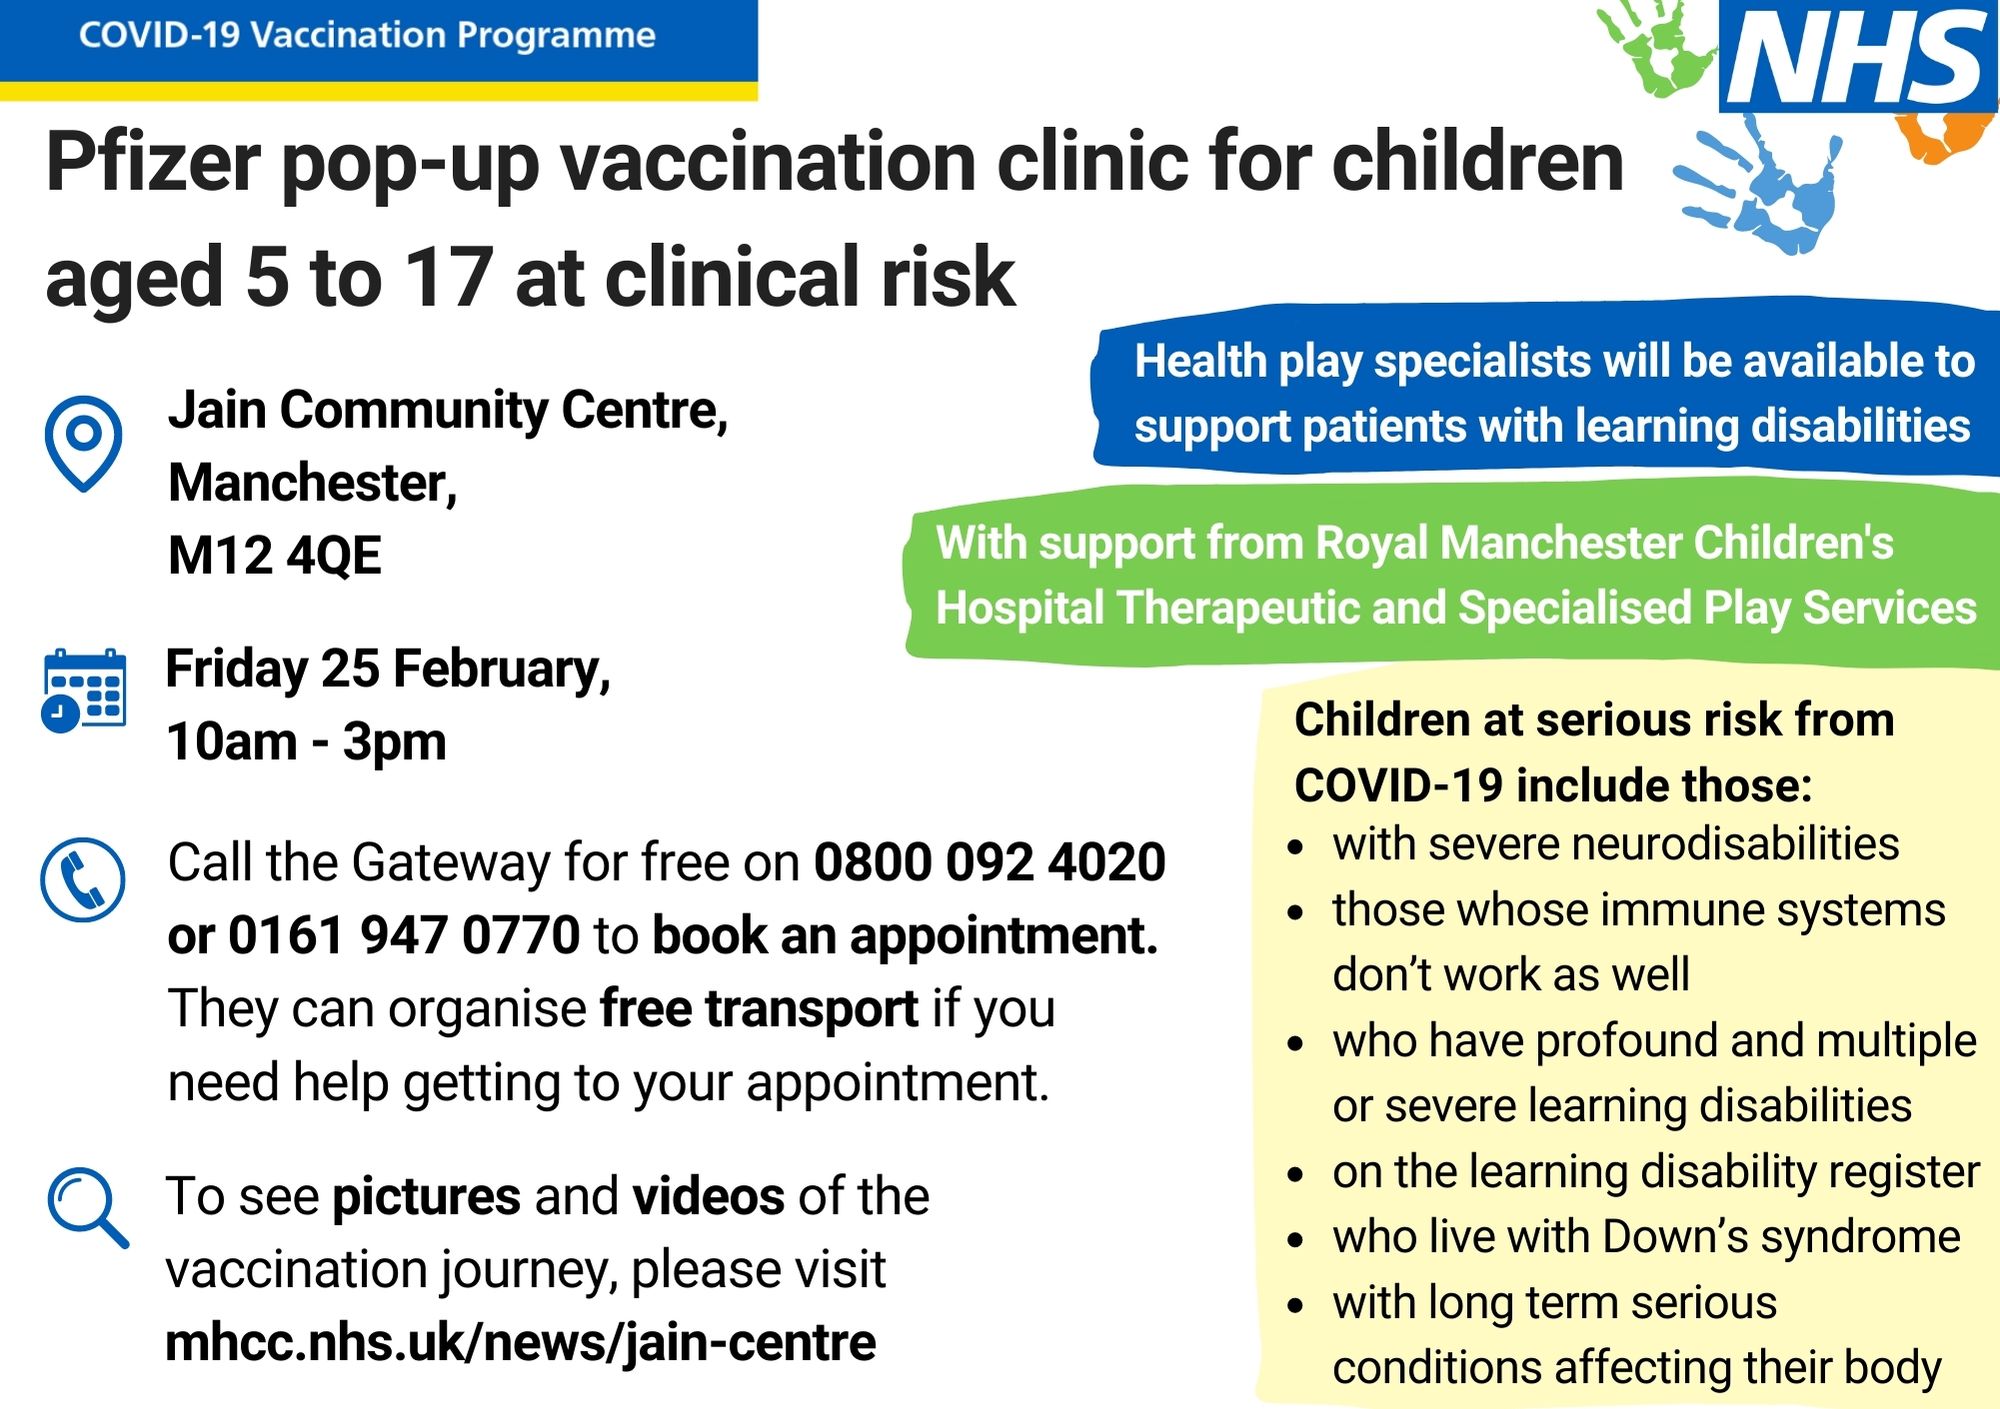 The flyer includes details (date, time, venue, additional support available) for the "Pfizer pop-up vaccination clinic for children aged 5-17 at clinical risk".